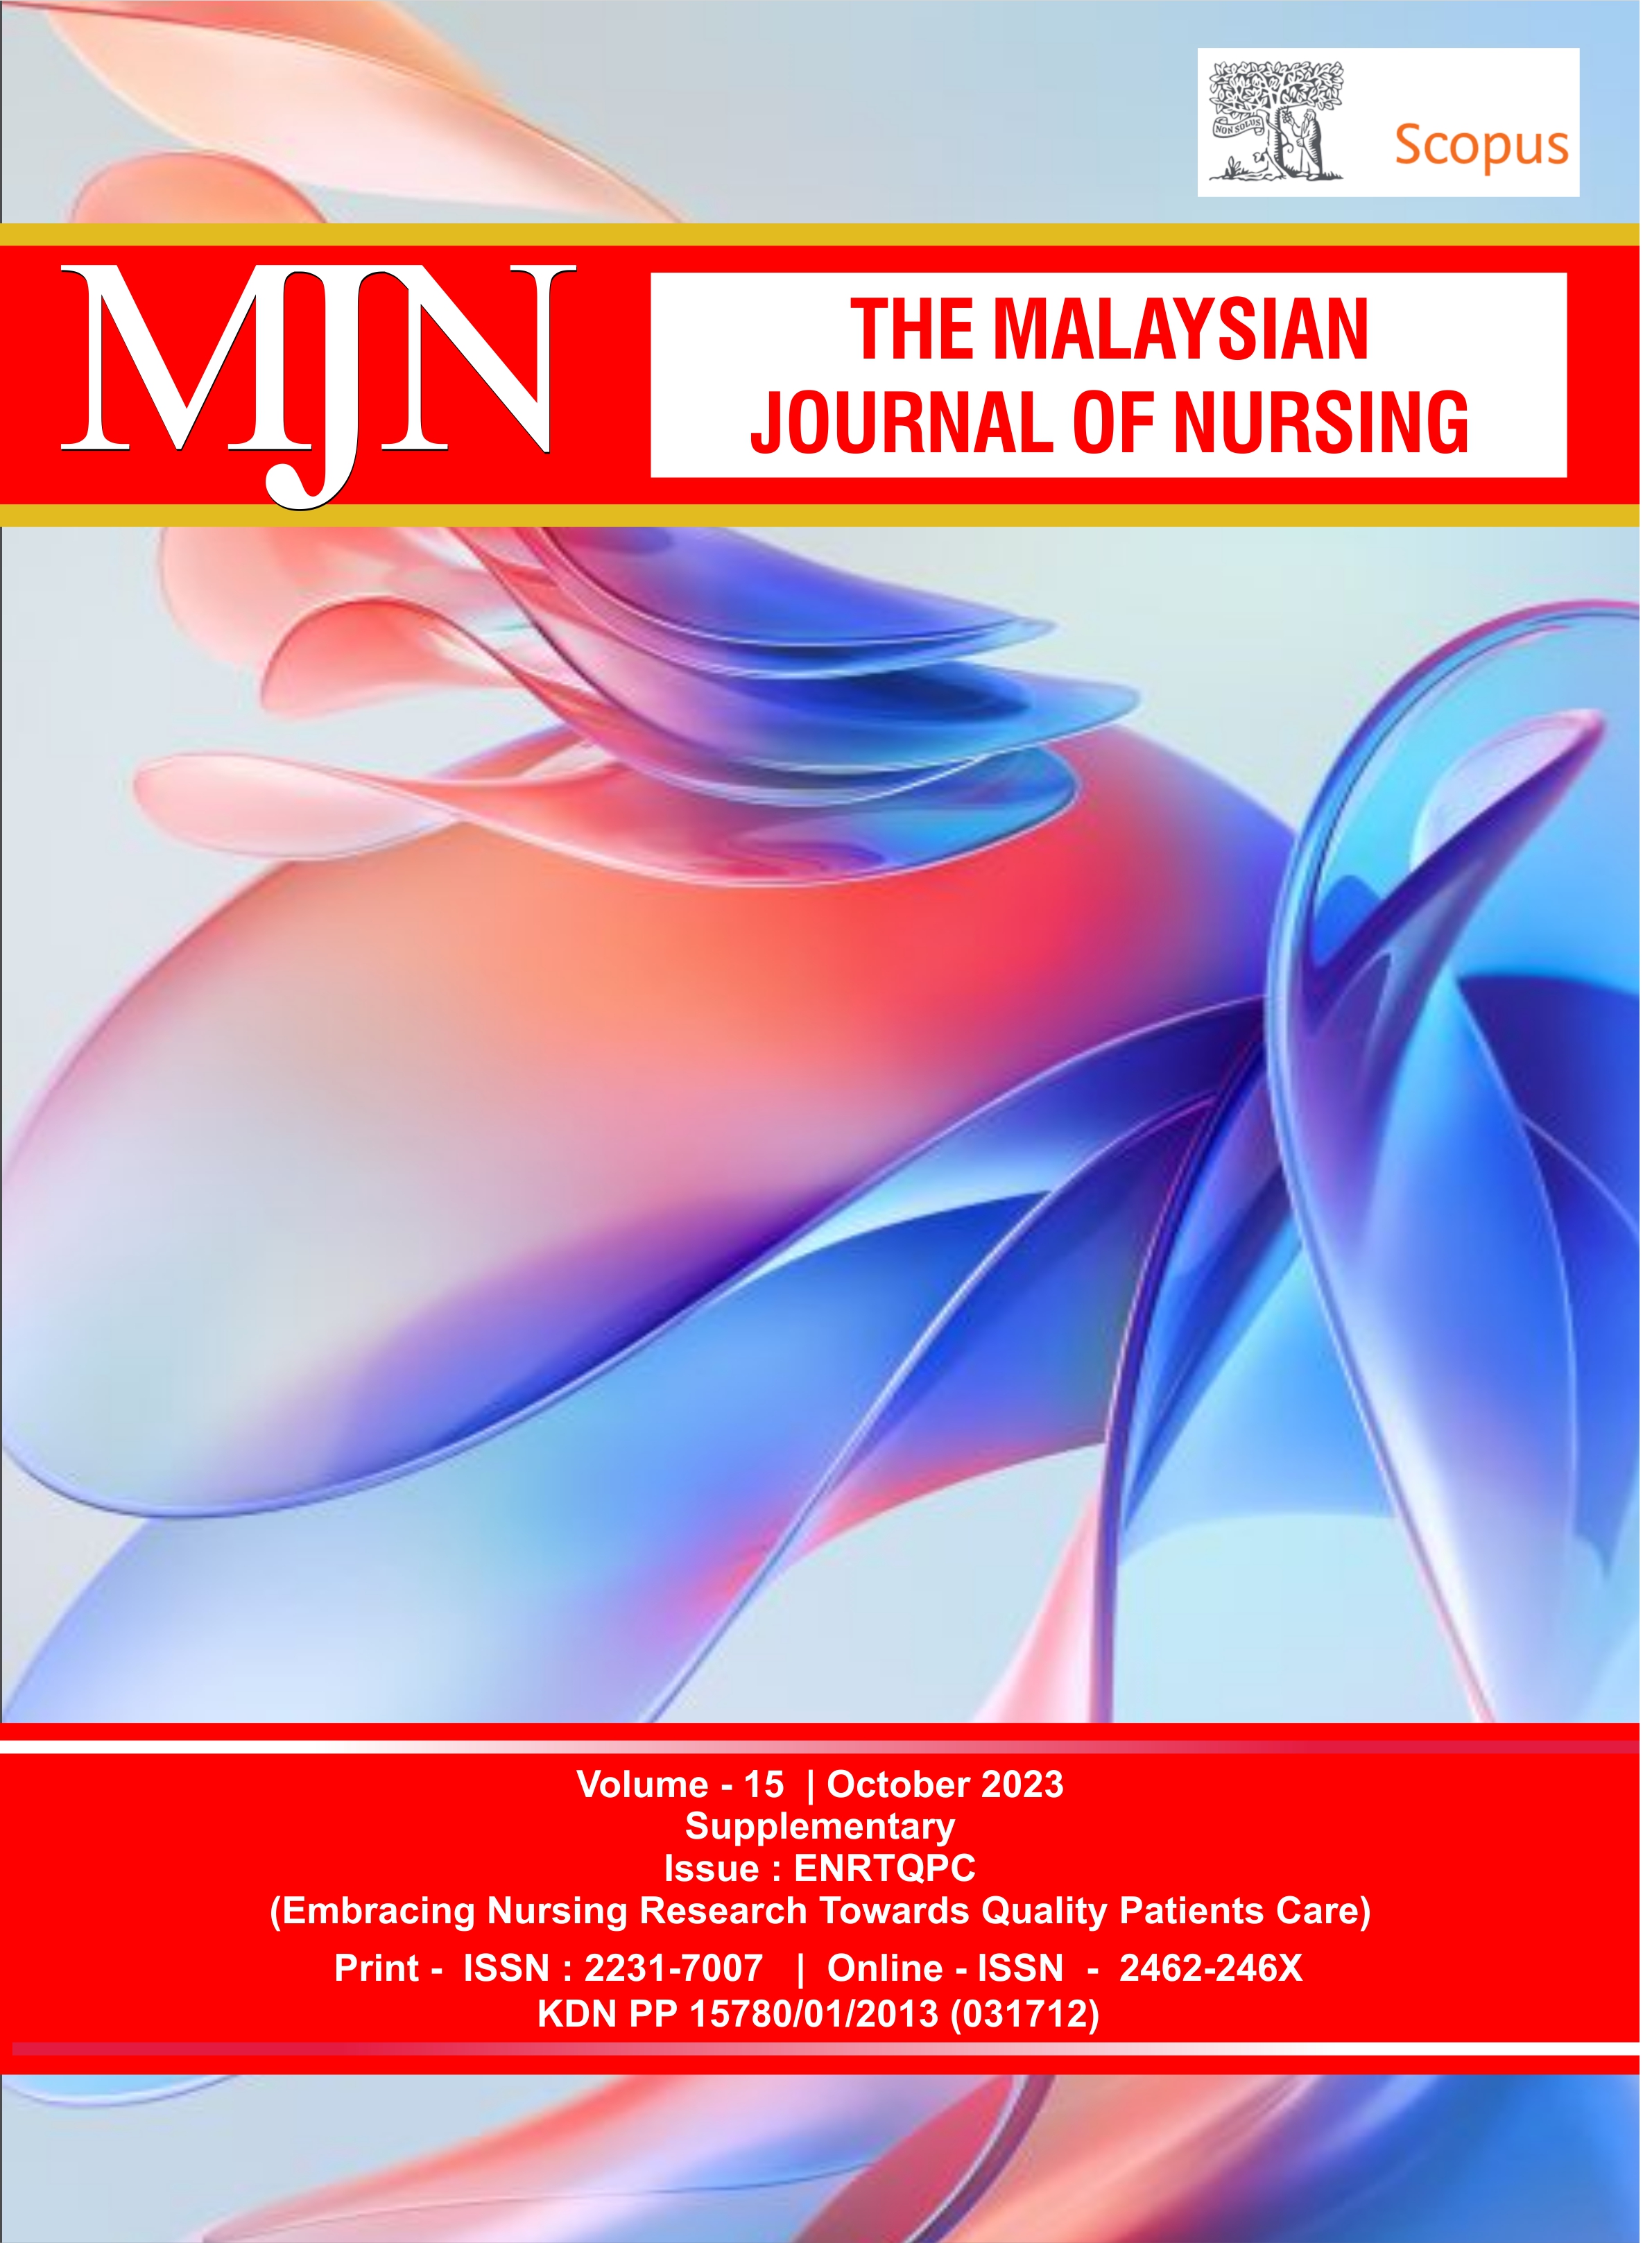 					View Vol. 15 No. Supplimentary 1 (2023): The Malaysian Journal of Nursing 
				